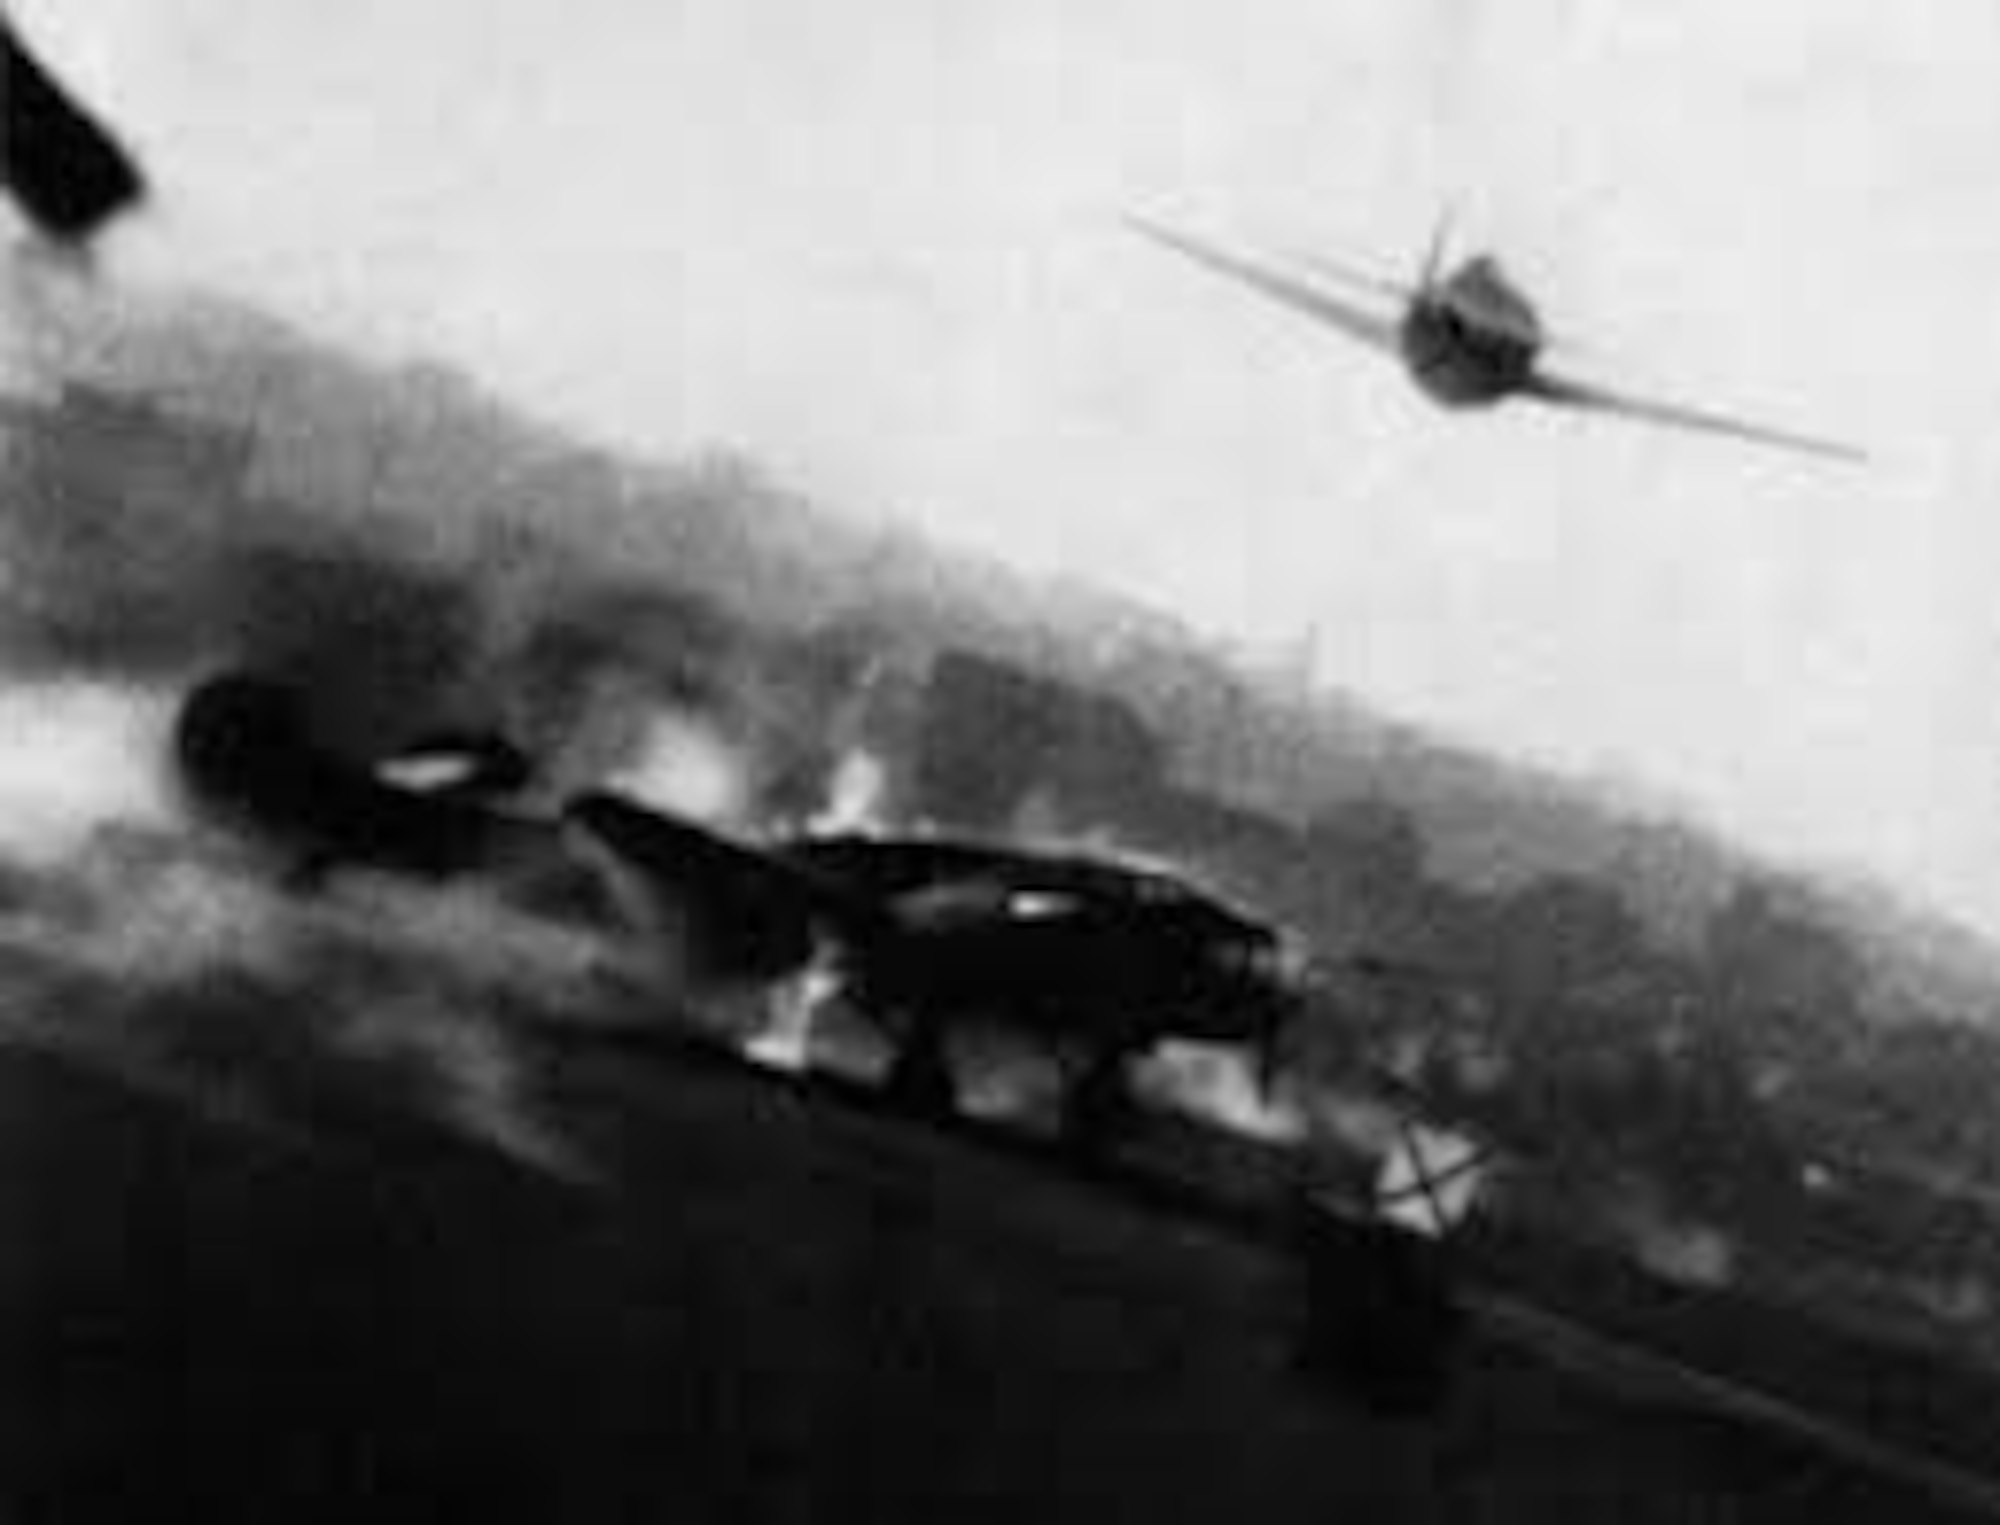 A photograph, taken by the gun camera of a P-47 Thunderbolt, of an American strafing attack on a German airfield in France. In addition to attacks on transportation targets, Allied aircraft attacked German airfields in France and Belgium. These attacks, combined with the intensifying strategic bombing of industrial targets and cities in Germany, forced the Luftwaffe to withdraw most of their fighters from Western Europe back to Germany. (USAAF archival photo)